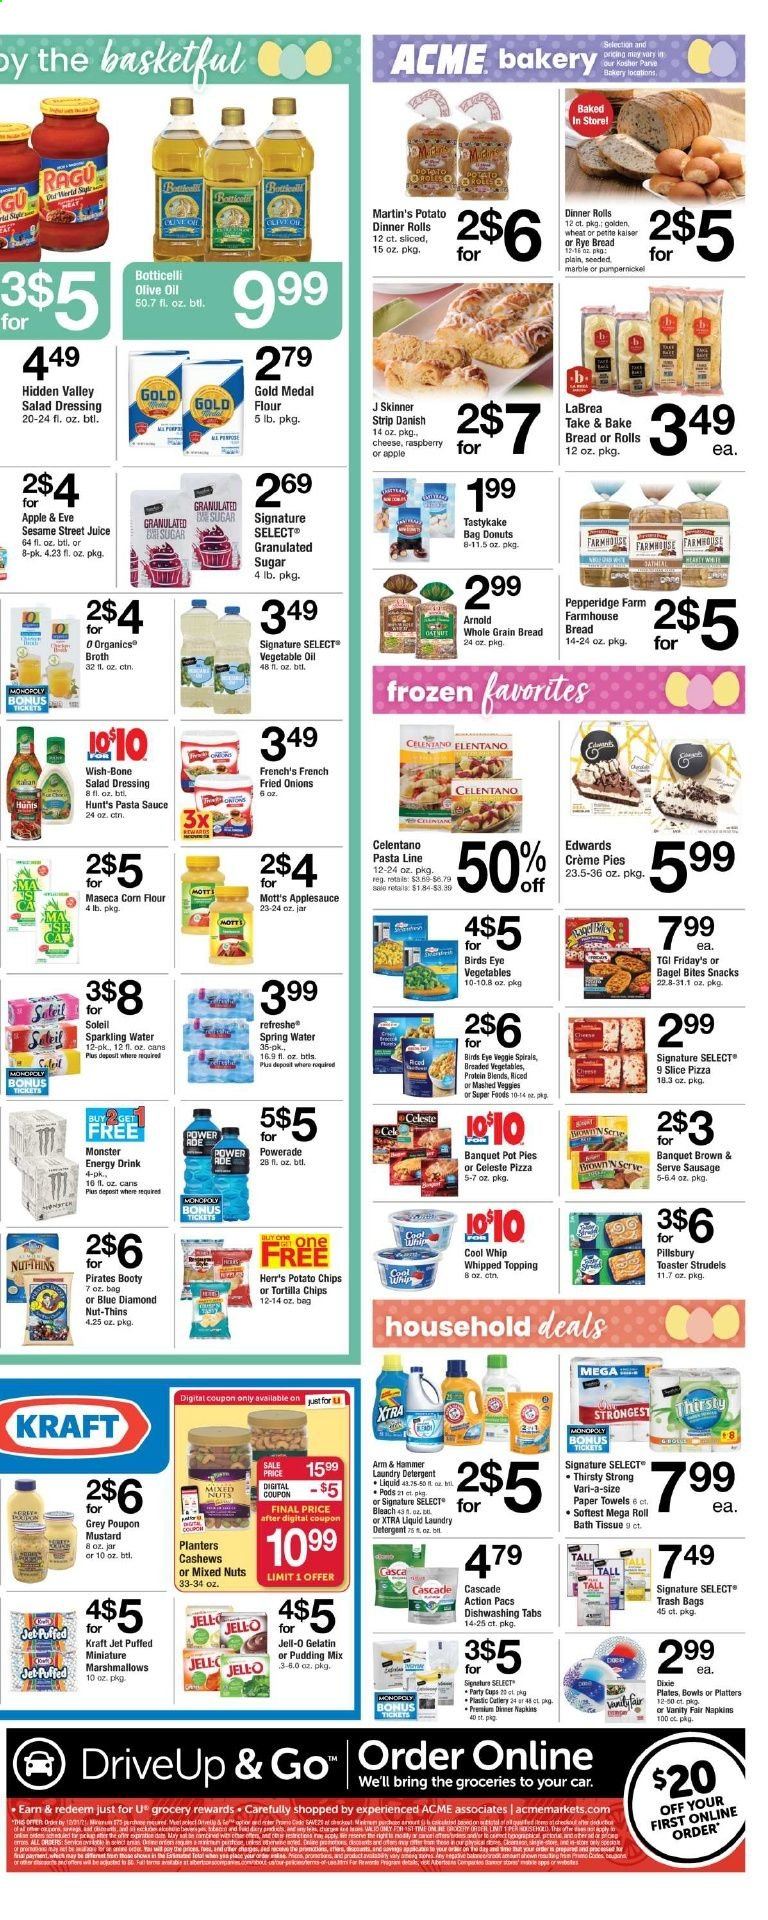 thumbnail - ACME Flyer - 04/02/2021 - 04/08/2021 - Sales products - bread, dinner rolls, bagels, pot pie, donut, danish pastry, corn, pizza, pasta sauce, sauce, Pillsbury, Bird's Eye, Kraft®, sausage, cheese, pudding, Cool Whip, marshmallows, tortilla chips, potato chips, snack, Thins, ARM & HAMMER, flour, granulated sugar, sugar, corn flour, topping, Jell-O, broth, Skinner Pasta, mustard, salad dressing, dressing, ragu, vegetable oil, apple sauce, cashews, mixed nuts, Planters, Blue Diamond, Powerade, juice, energy drink, Monster, Monster Energy, Mott's, spring water, sparkling water, Celeste, napkins, bath tissue, kitchen towels, paper towels, detergent, Cascade, bleach, laundry detergent, XTRA, Jet, trash bags, plate, Sesame Street, gelatin, toaster, bag, Monopoly, onion. Page 3.